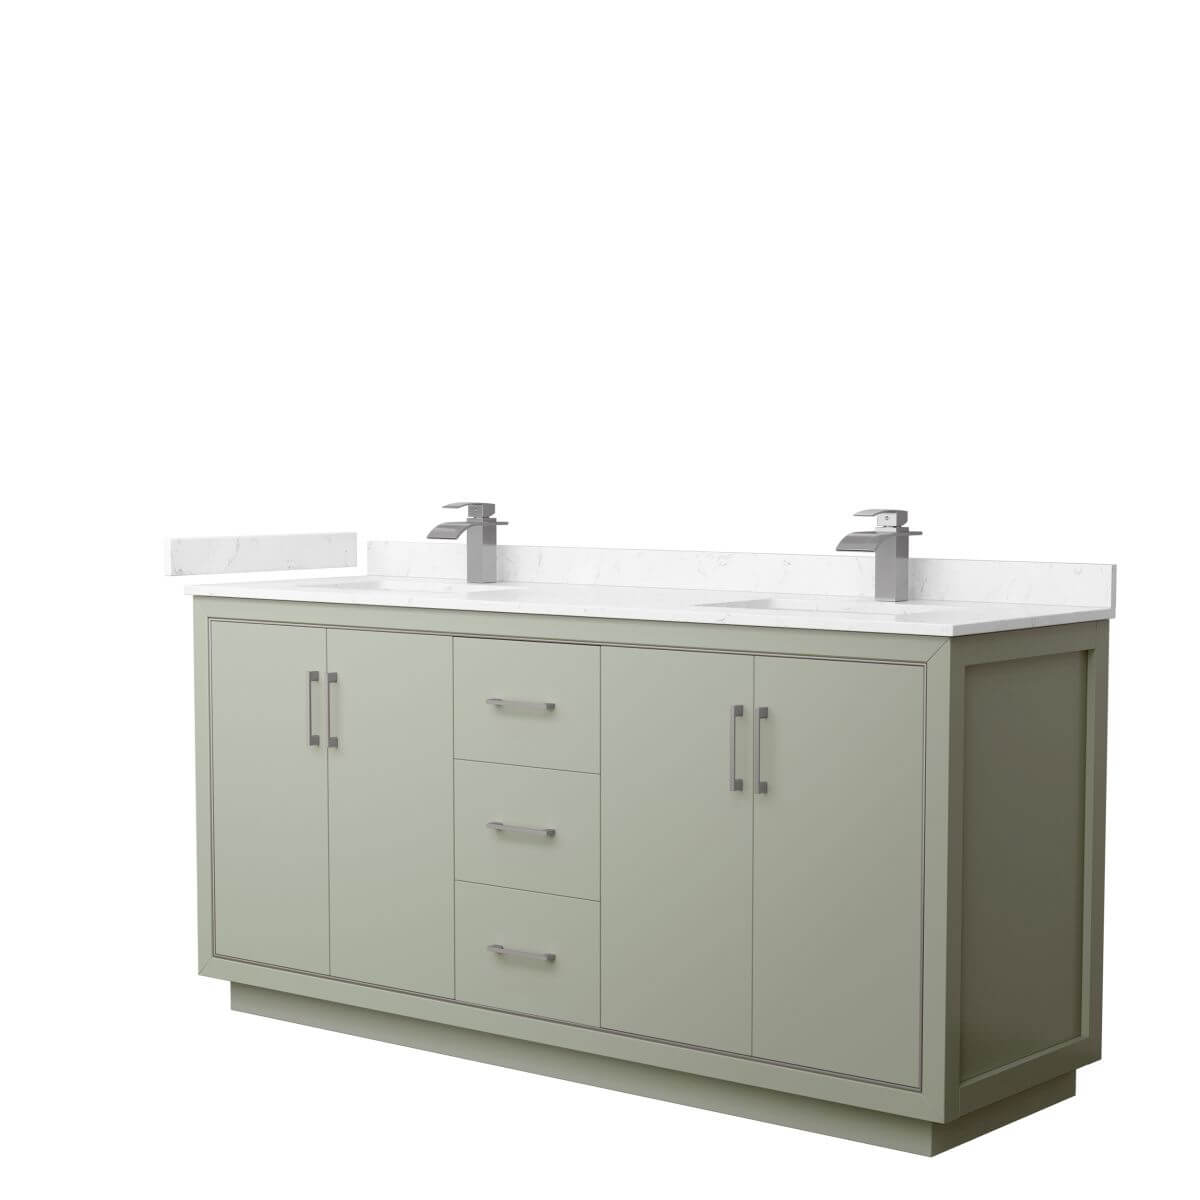 Wyndham Collection WCF111172DLGC2UNSMXX Icon 72 inch Double Bathroom Vanity in Light Green with Carrara Cultured Marble Countertop, Undermount Square Sinks and Brushed Nickel Trim